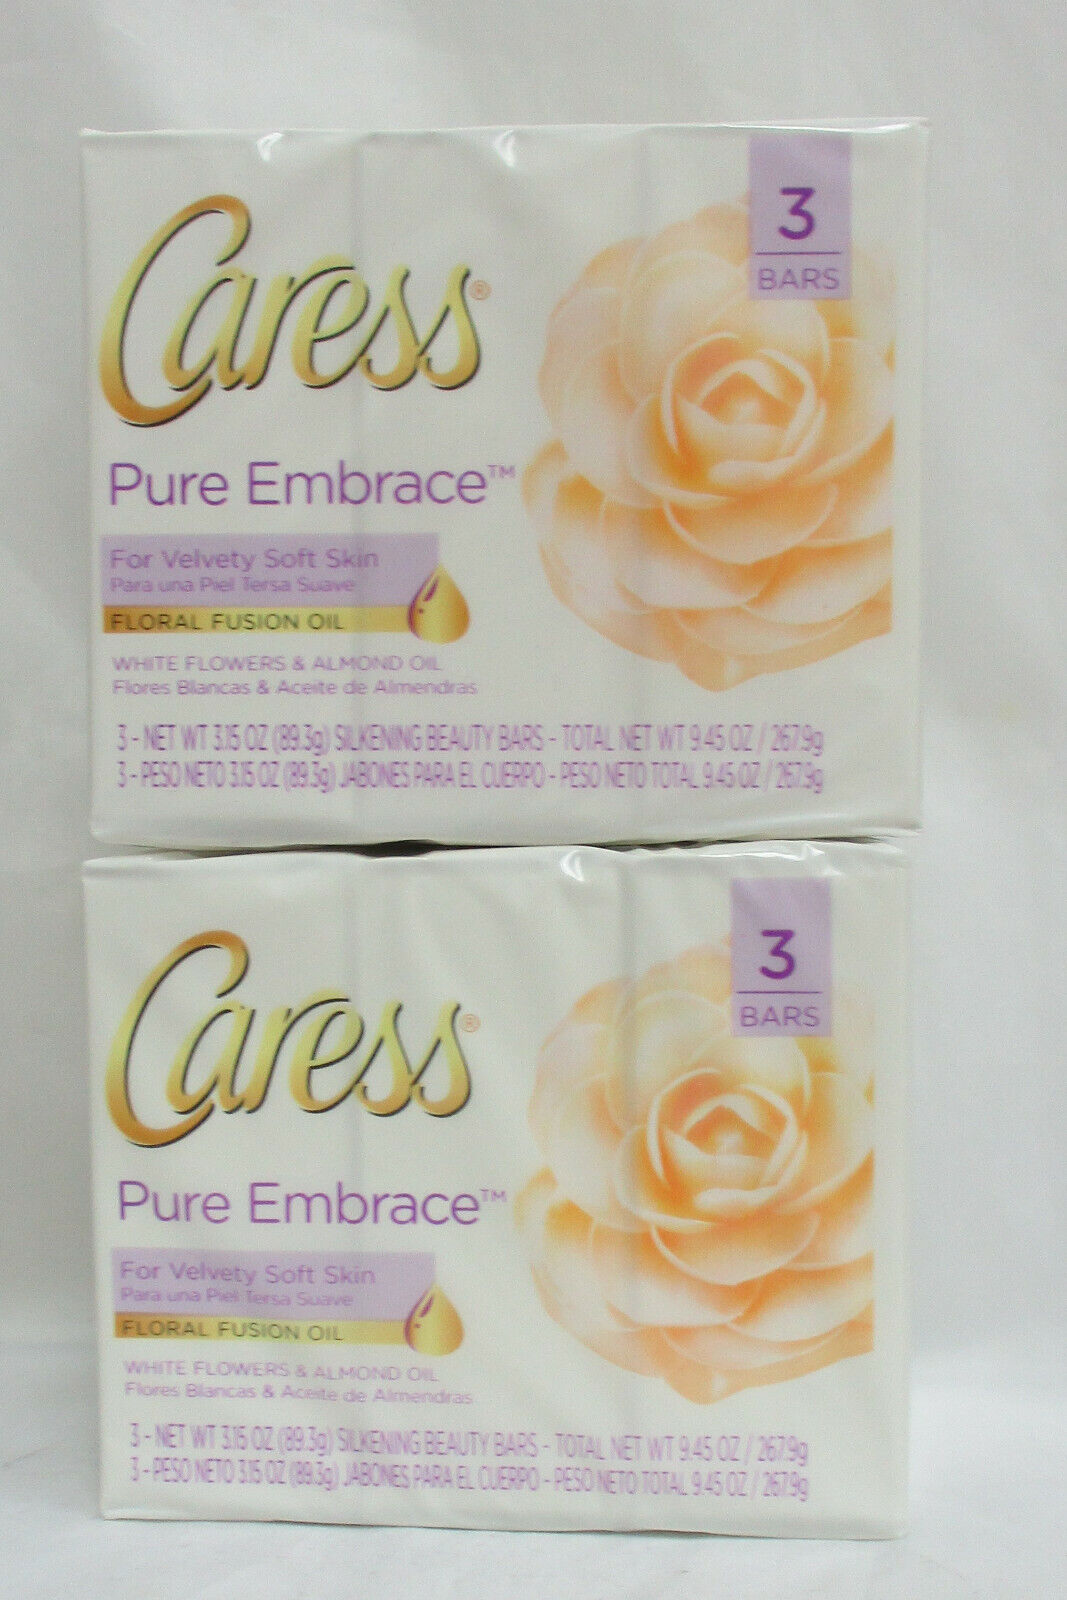 Caress Pure Embrace with White Flowers & Almond Oil 6 bars -